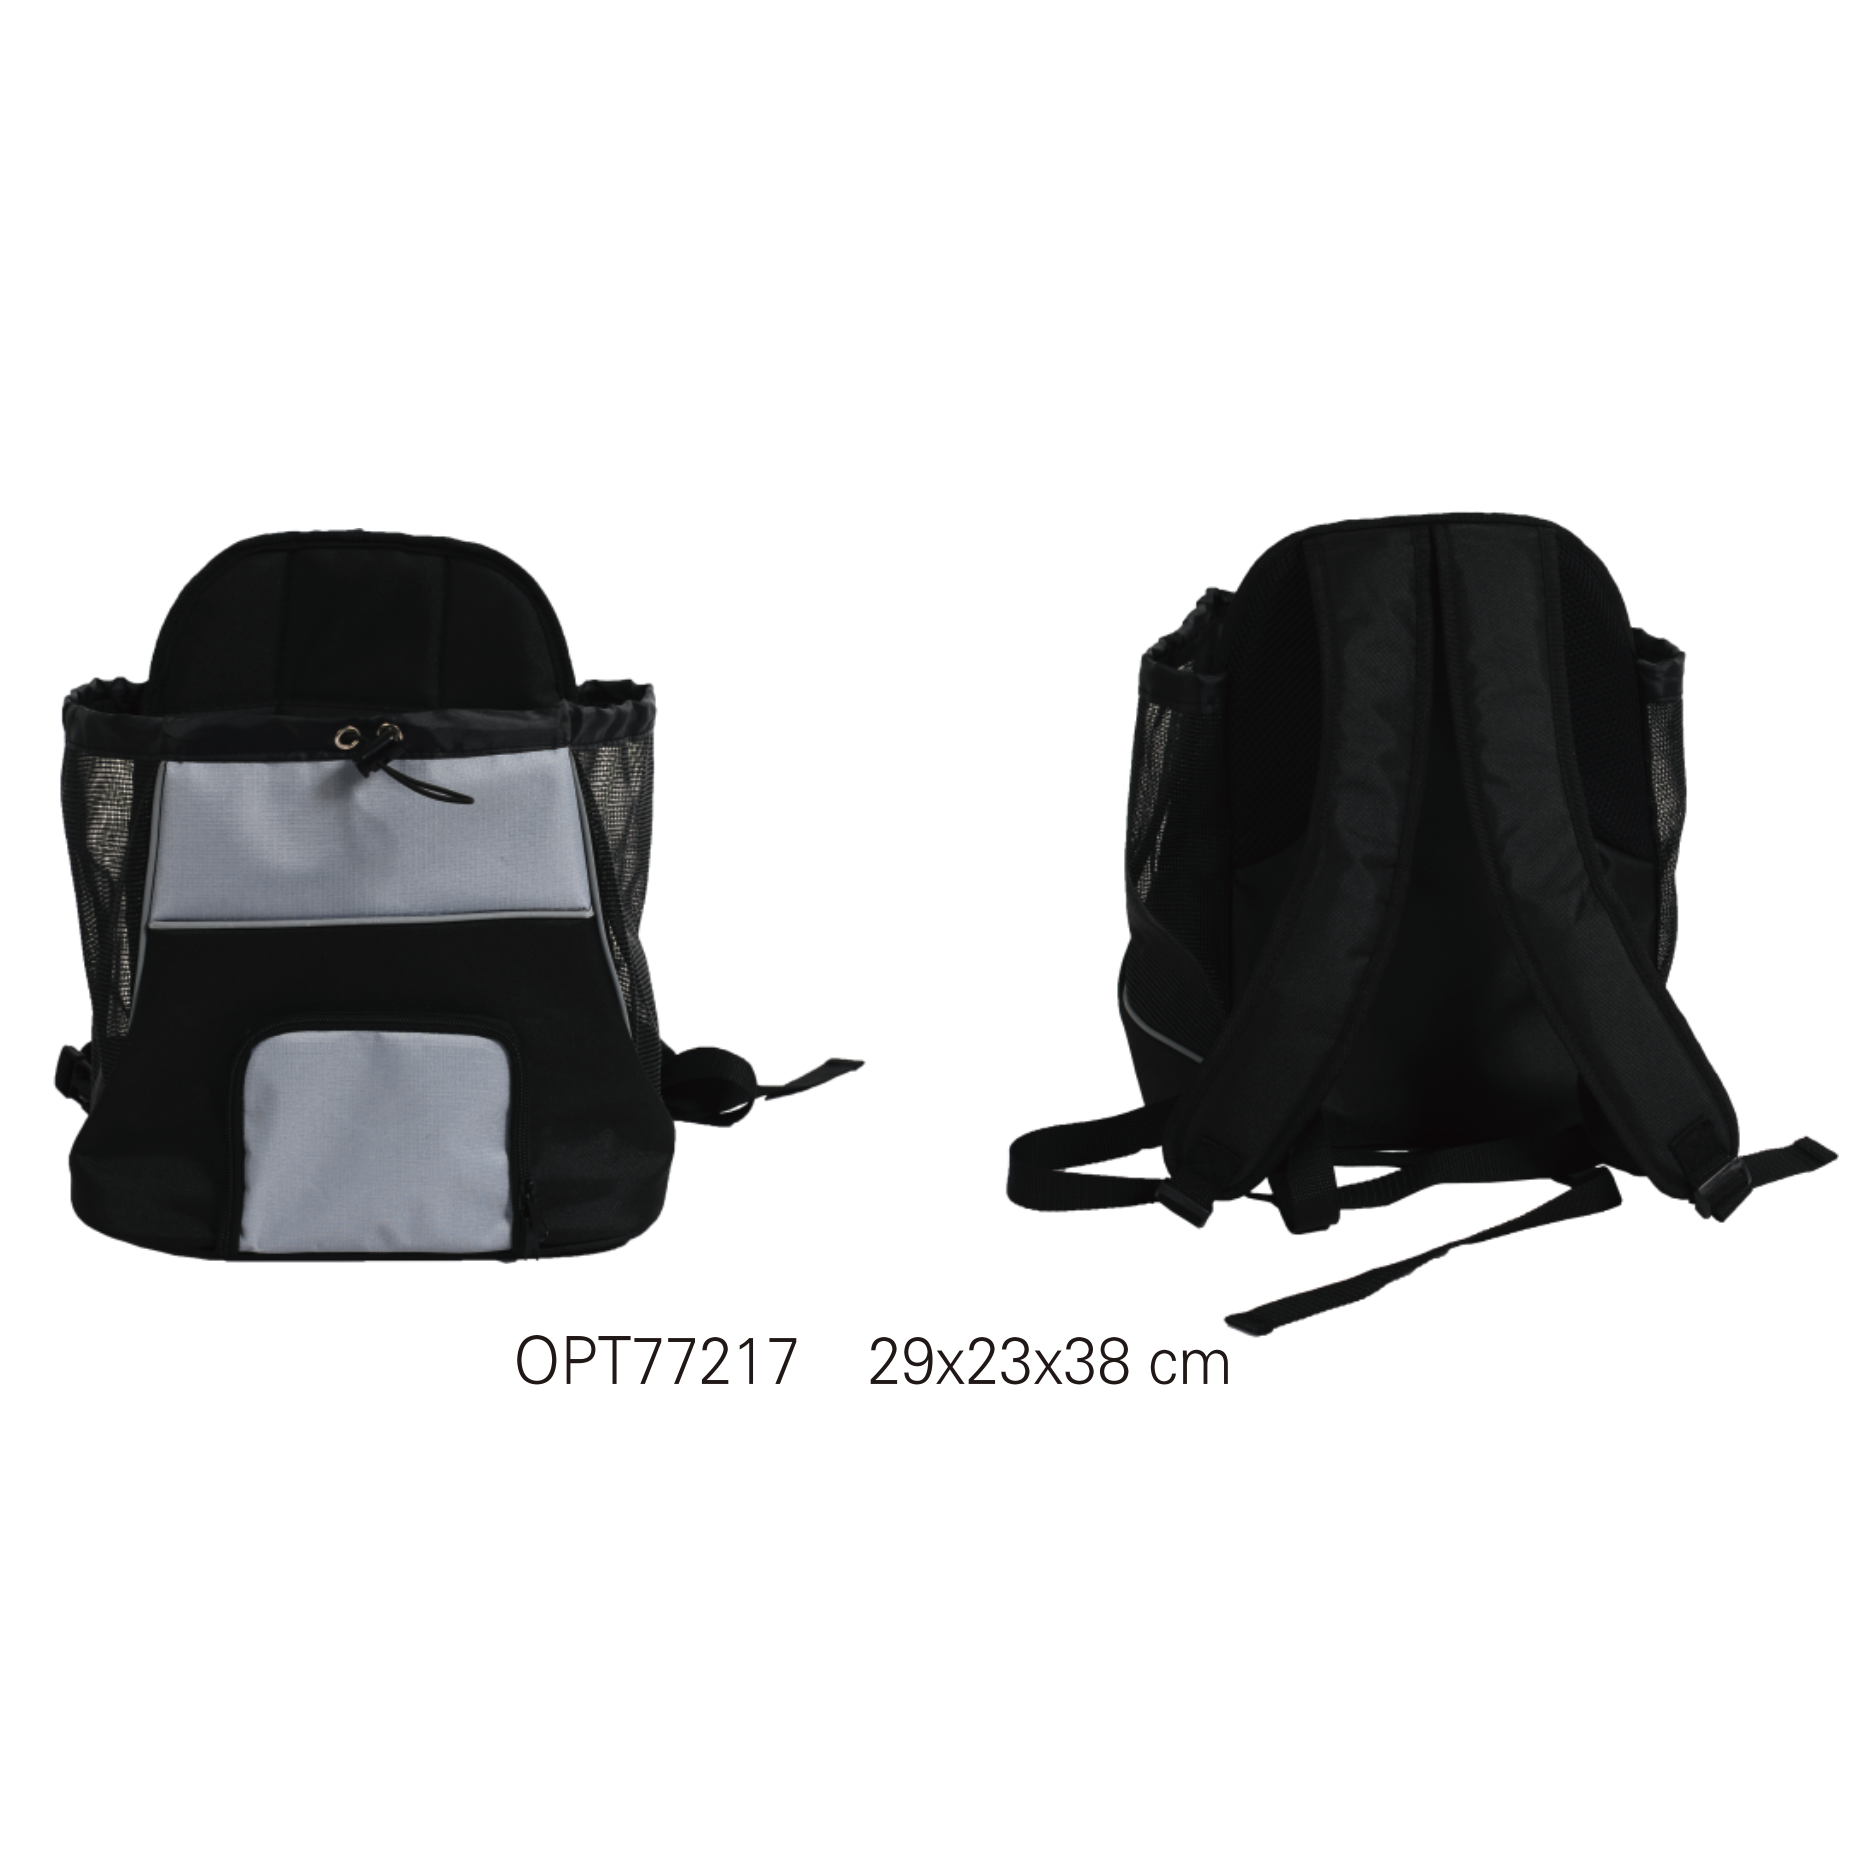 OPT77217 Pet bags & carriers